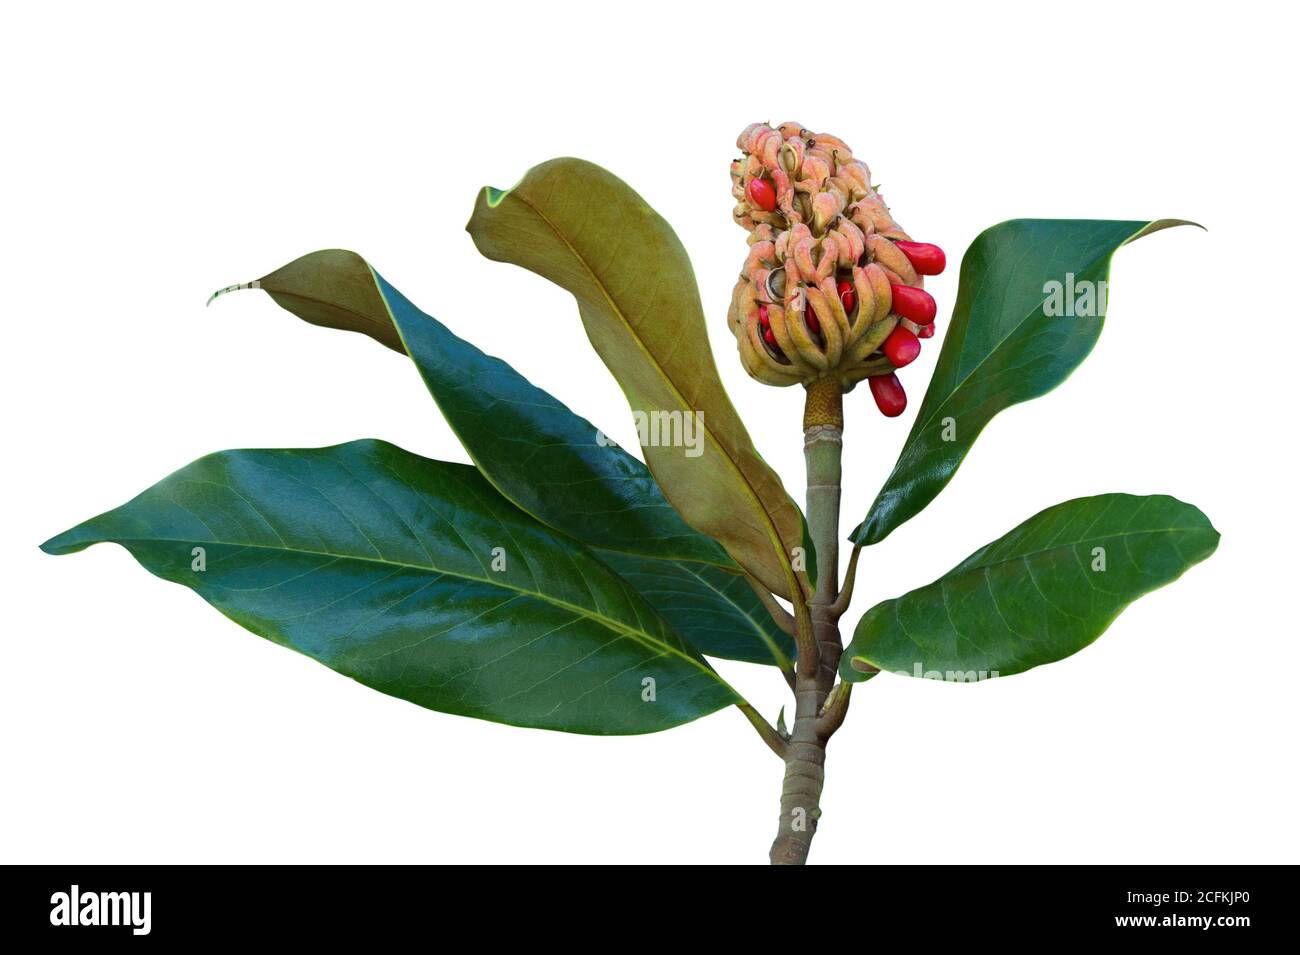 Autumn. One magnolia ( Magnolia grandiflora ) fruit with seeds and leaves. Isolated on white background Stock Photo